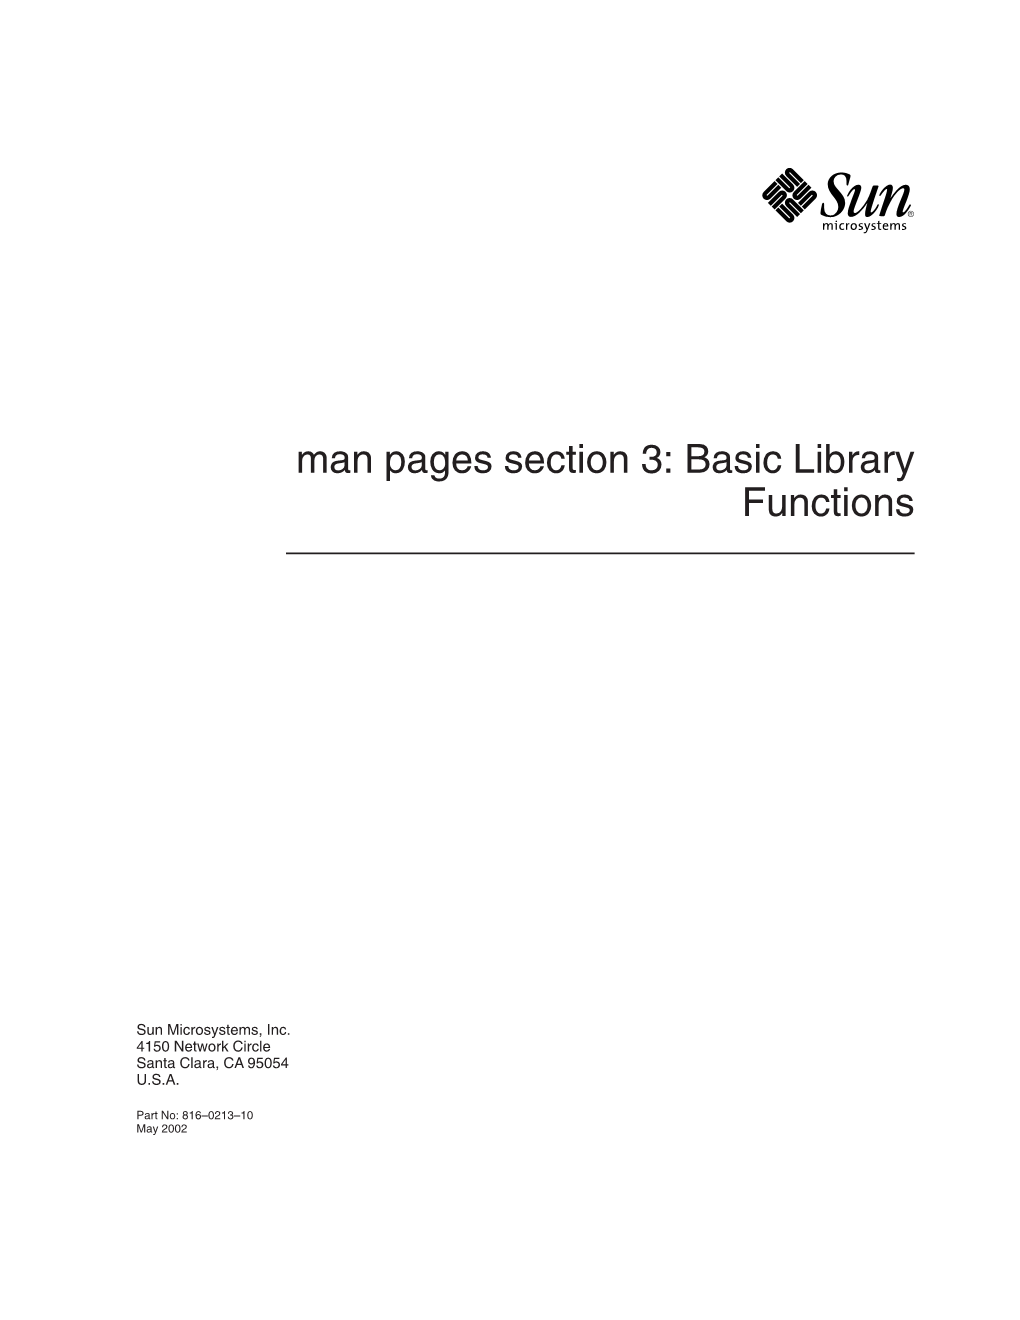 Man Pages Section 3: Basic Library Functions